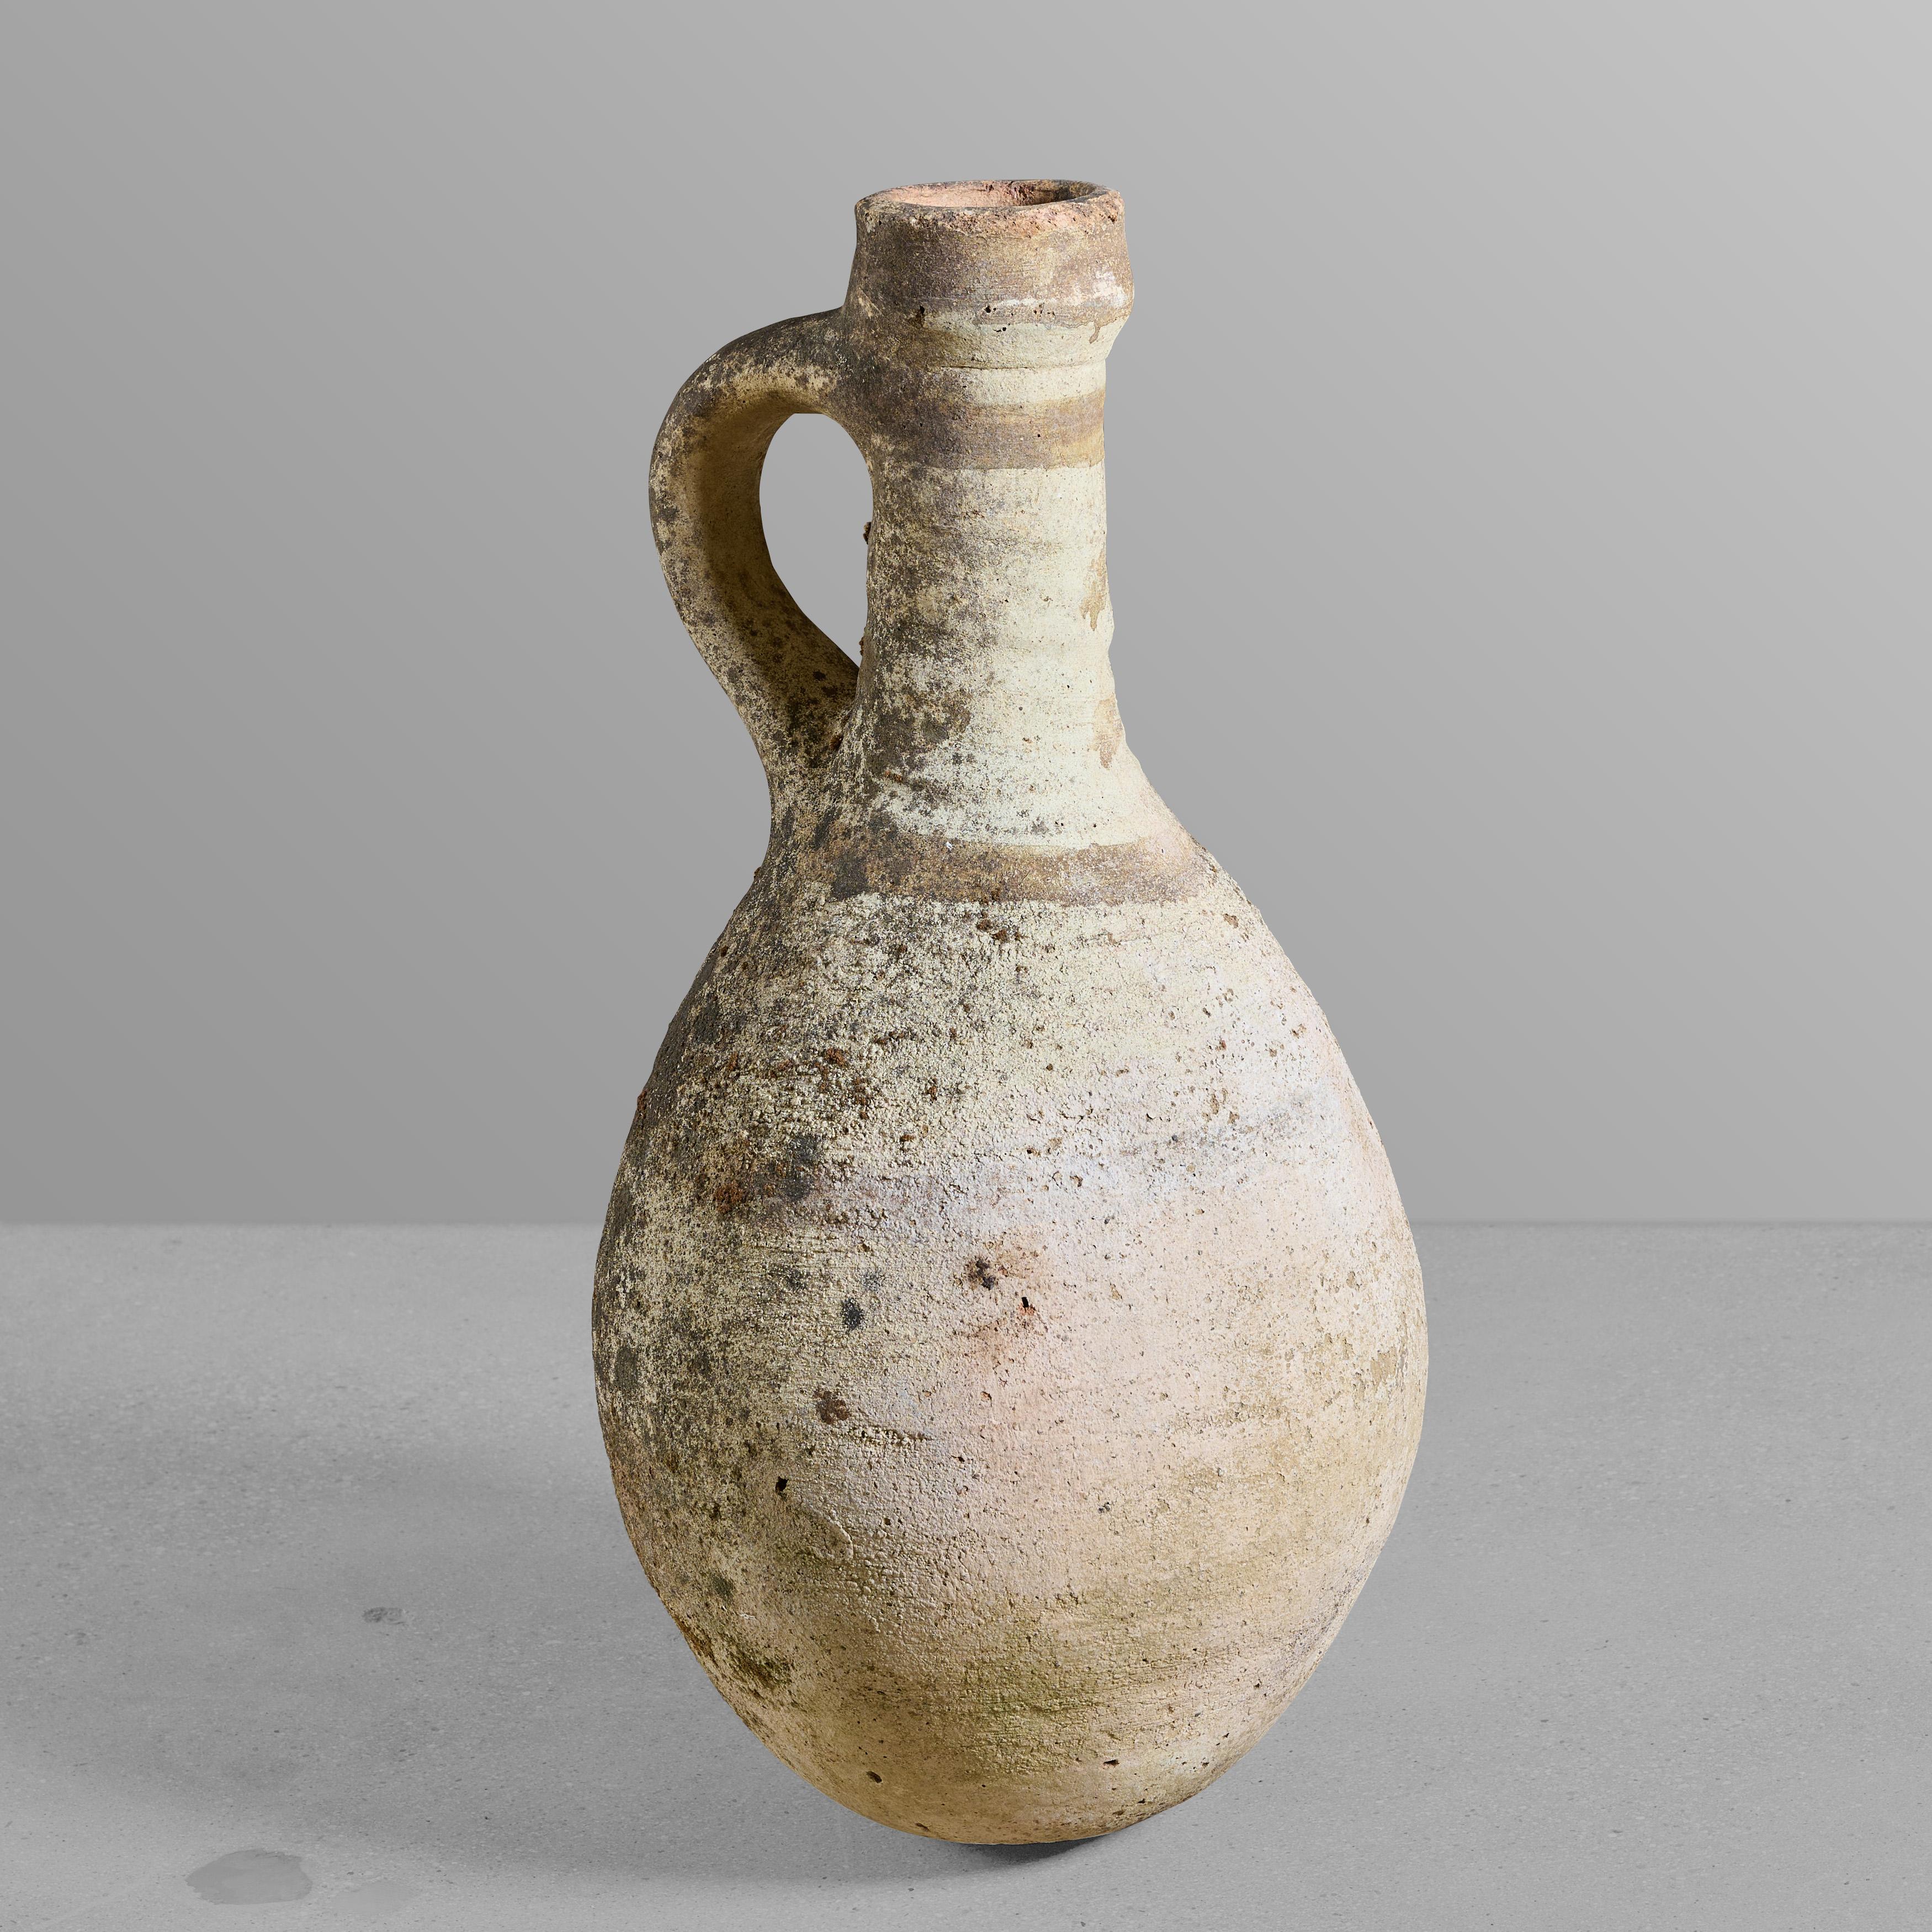 Ancient terra cotta wine vessel with the best patina.